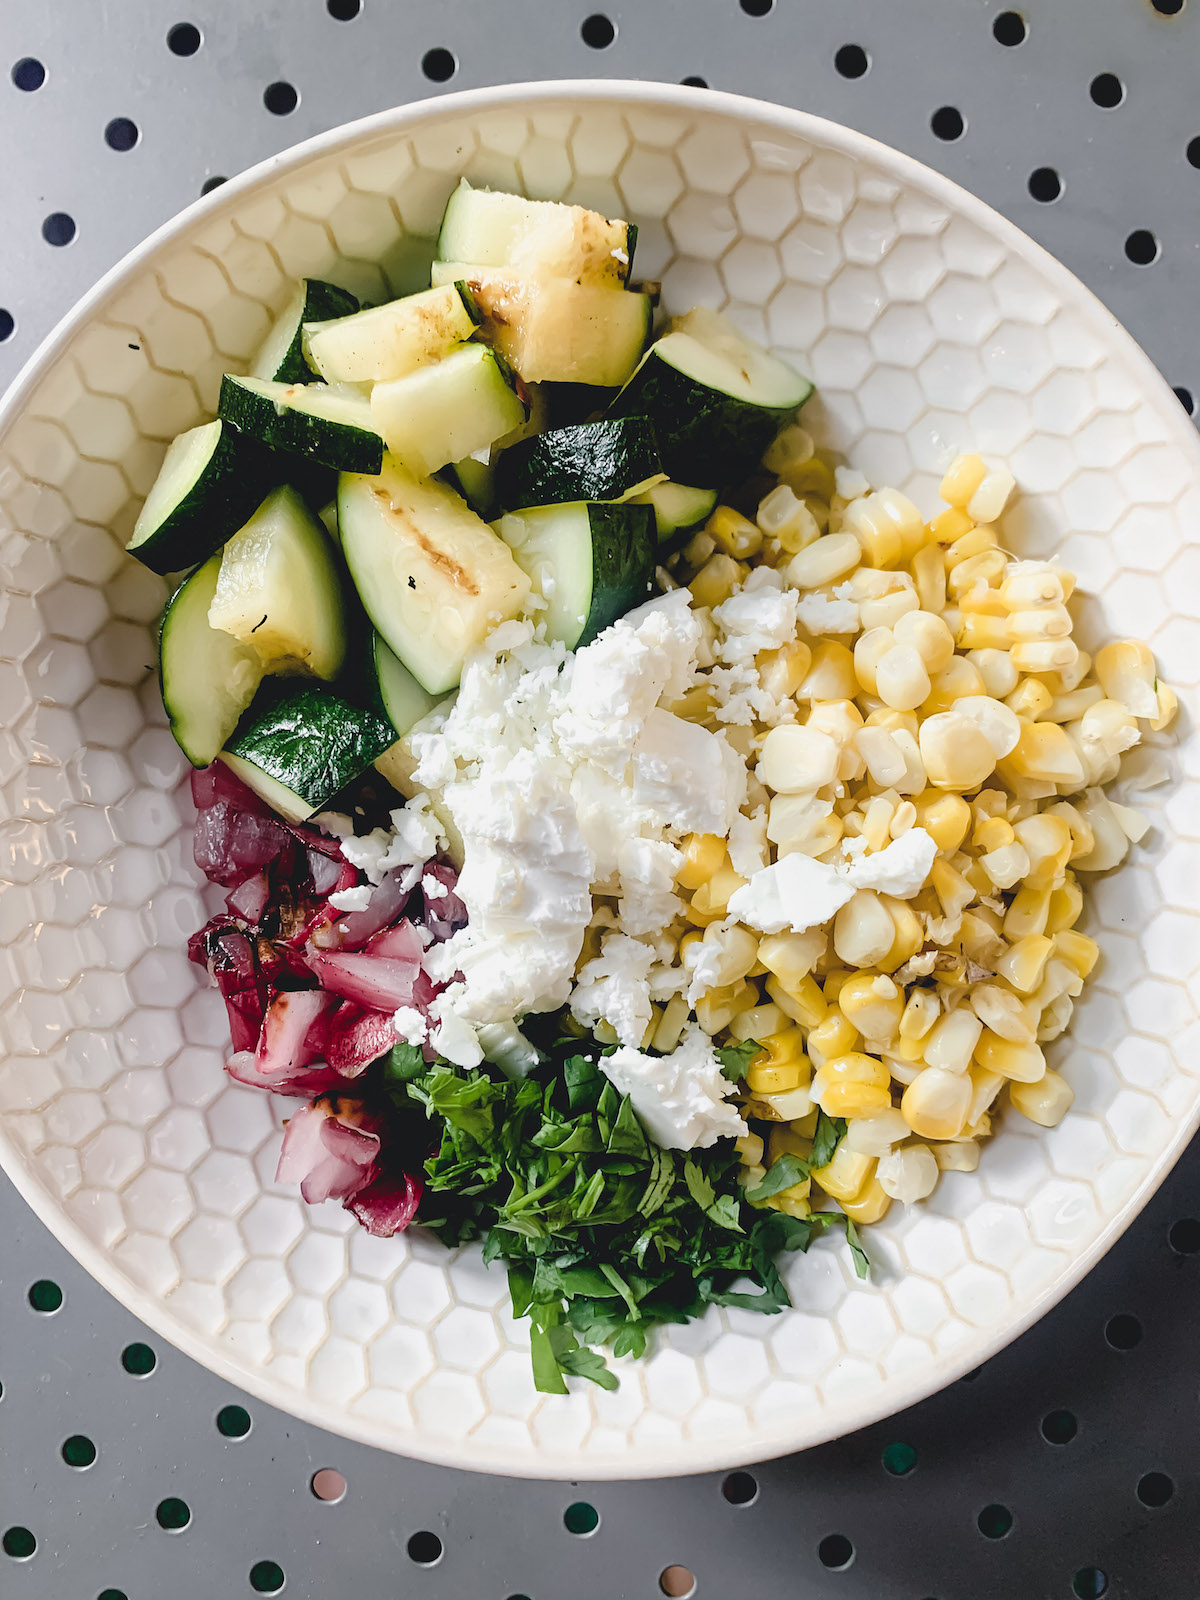 Grilled Corn and zucchini salad ingredients in a honeycomb patterned bowl